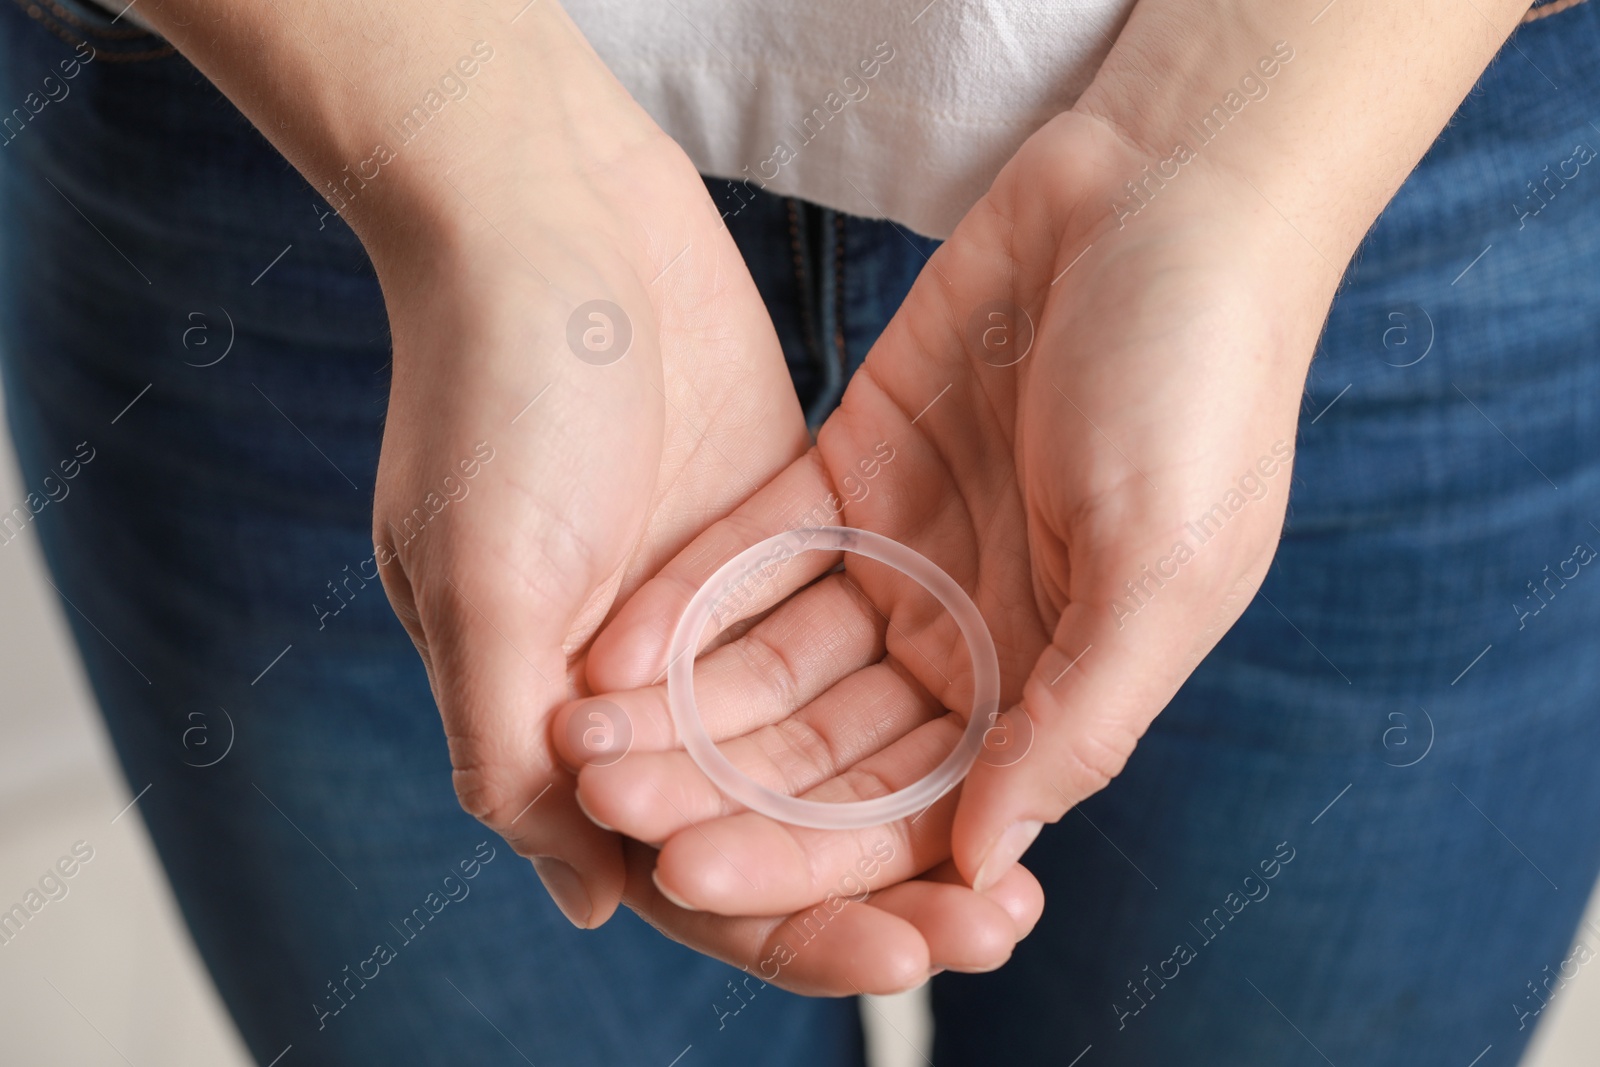 Photo of Woman holding diaphragm vaginal contraceptive ring on blurred background, closeup